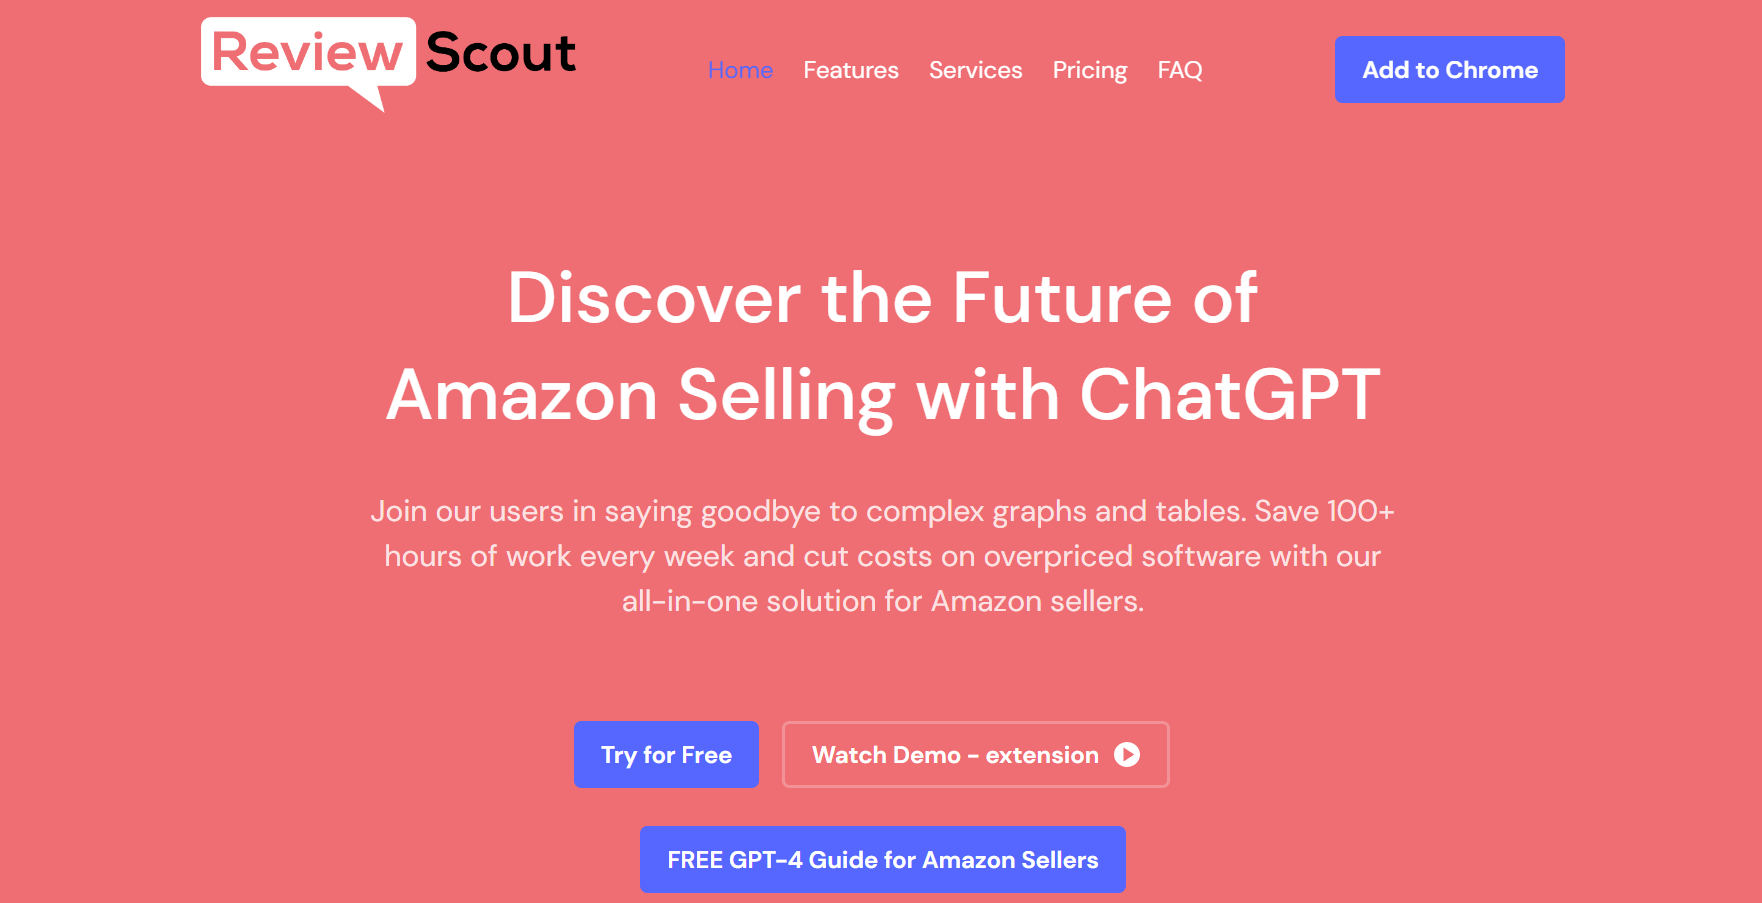 RviewScout Page